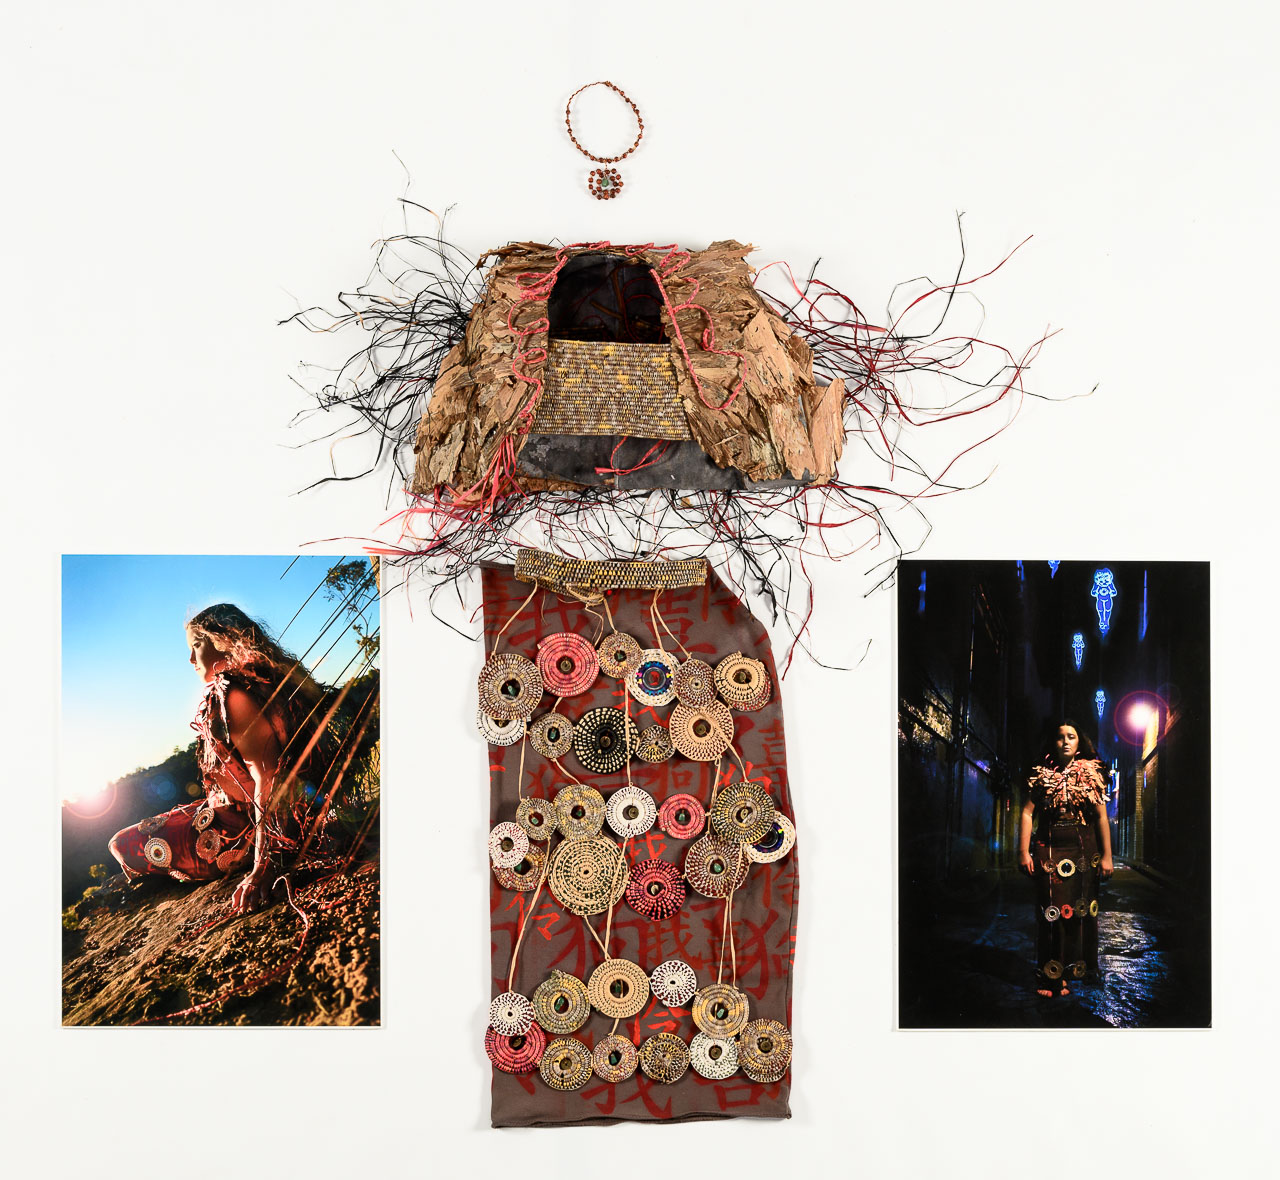 A wearable artwork accompanied by photographic documentation of the work being worn.